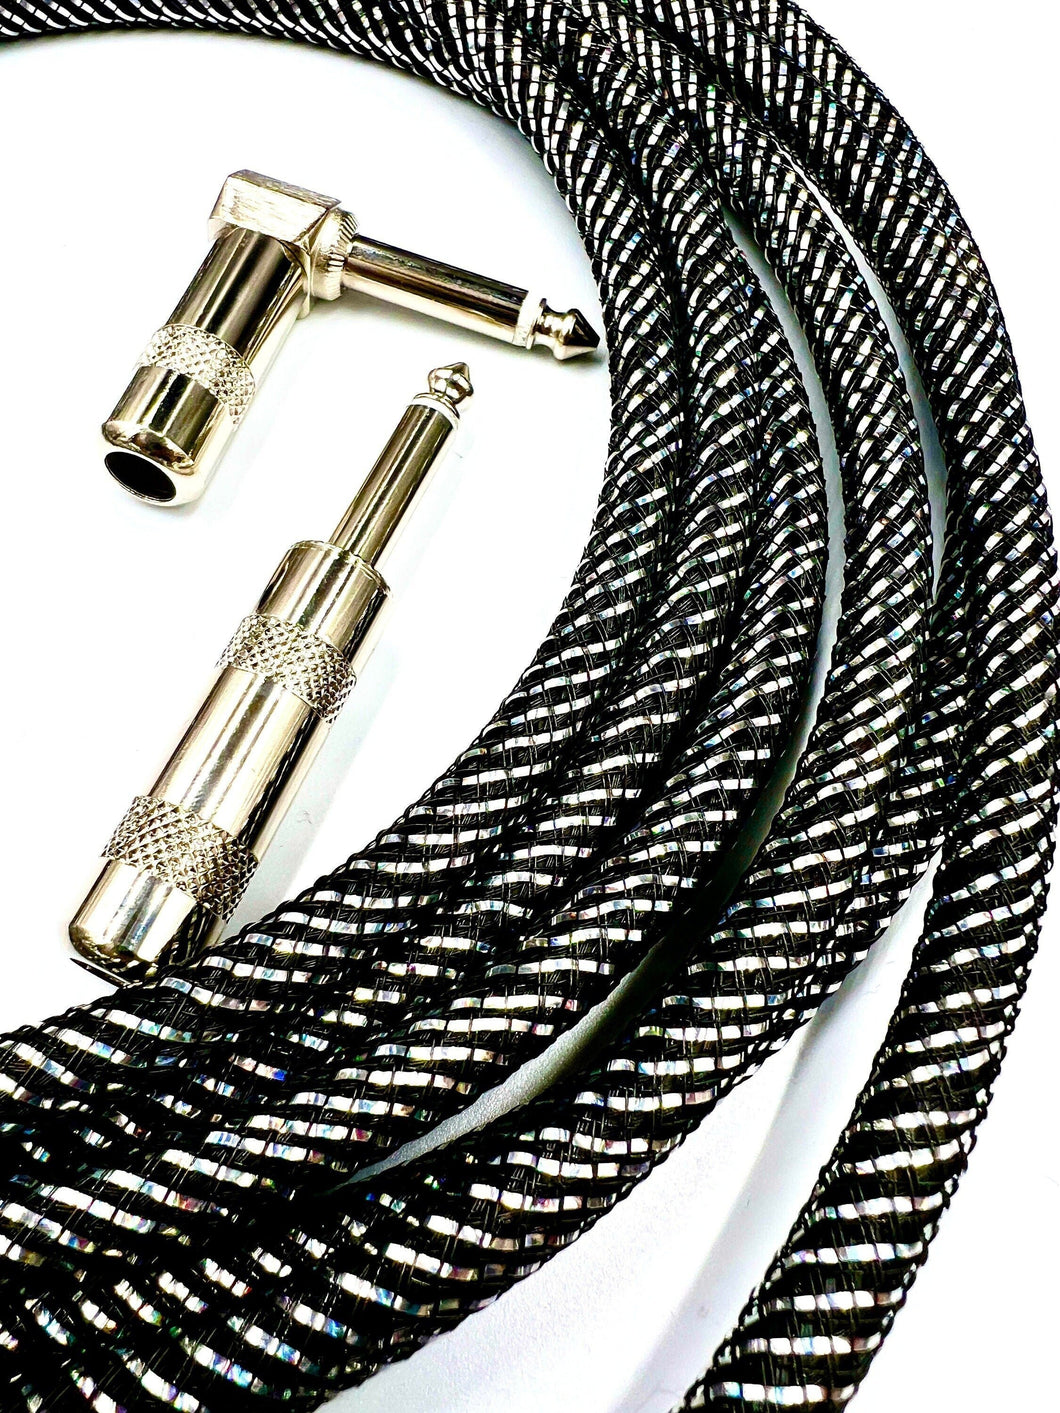 Pre-Order Black/Silver Holographic Cable Straight or Right-Angle (your choice)